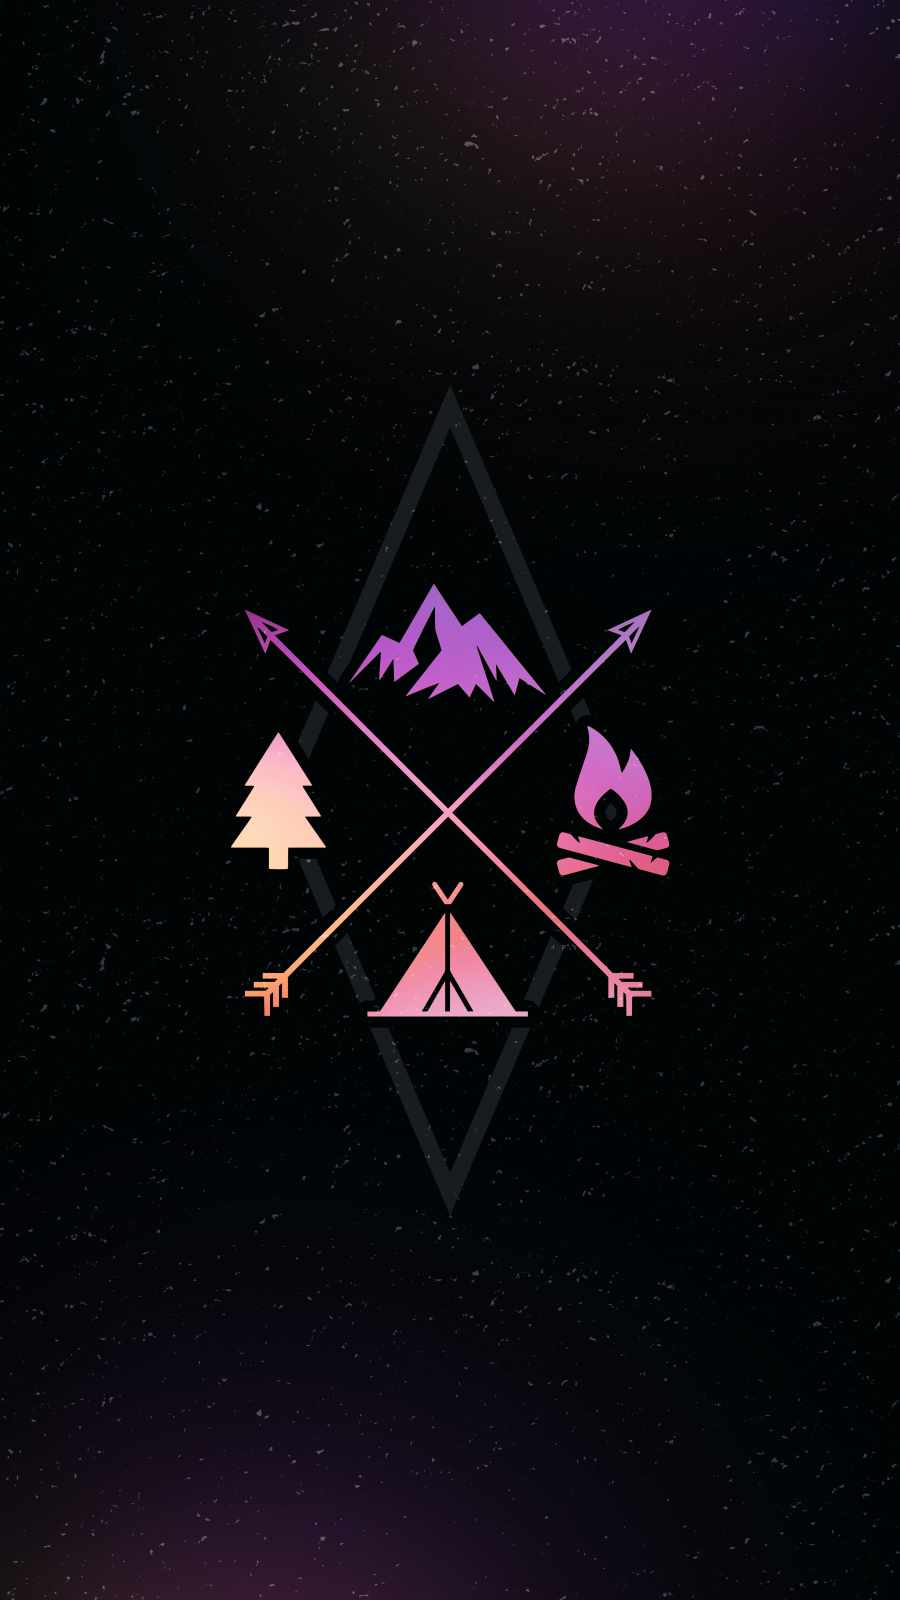 The image of a purple and pink mountain logo - Camping